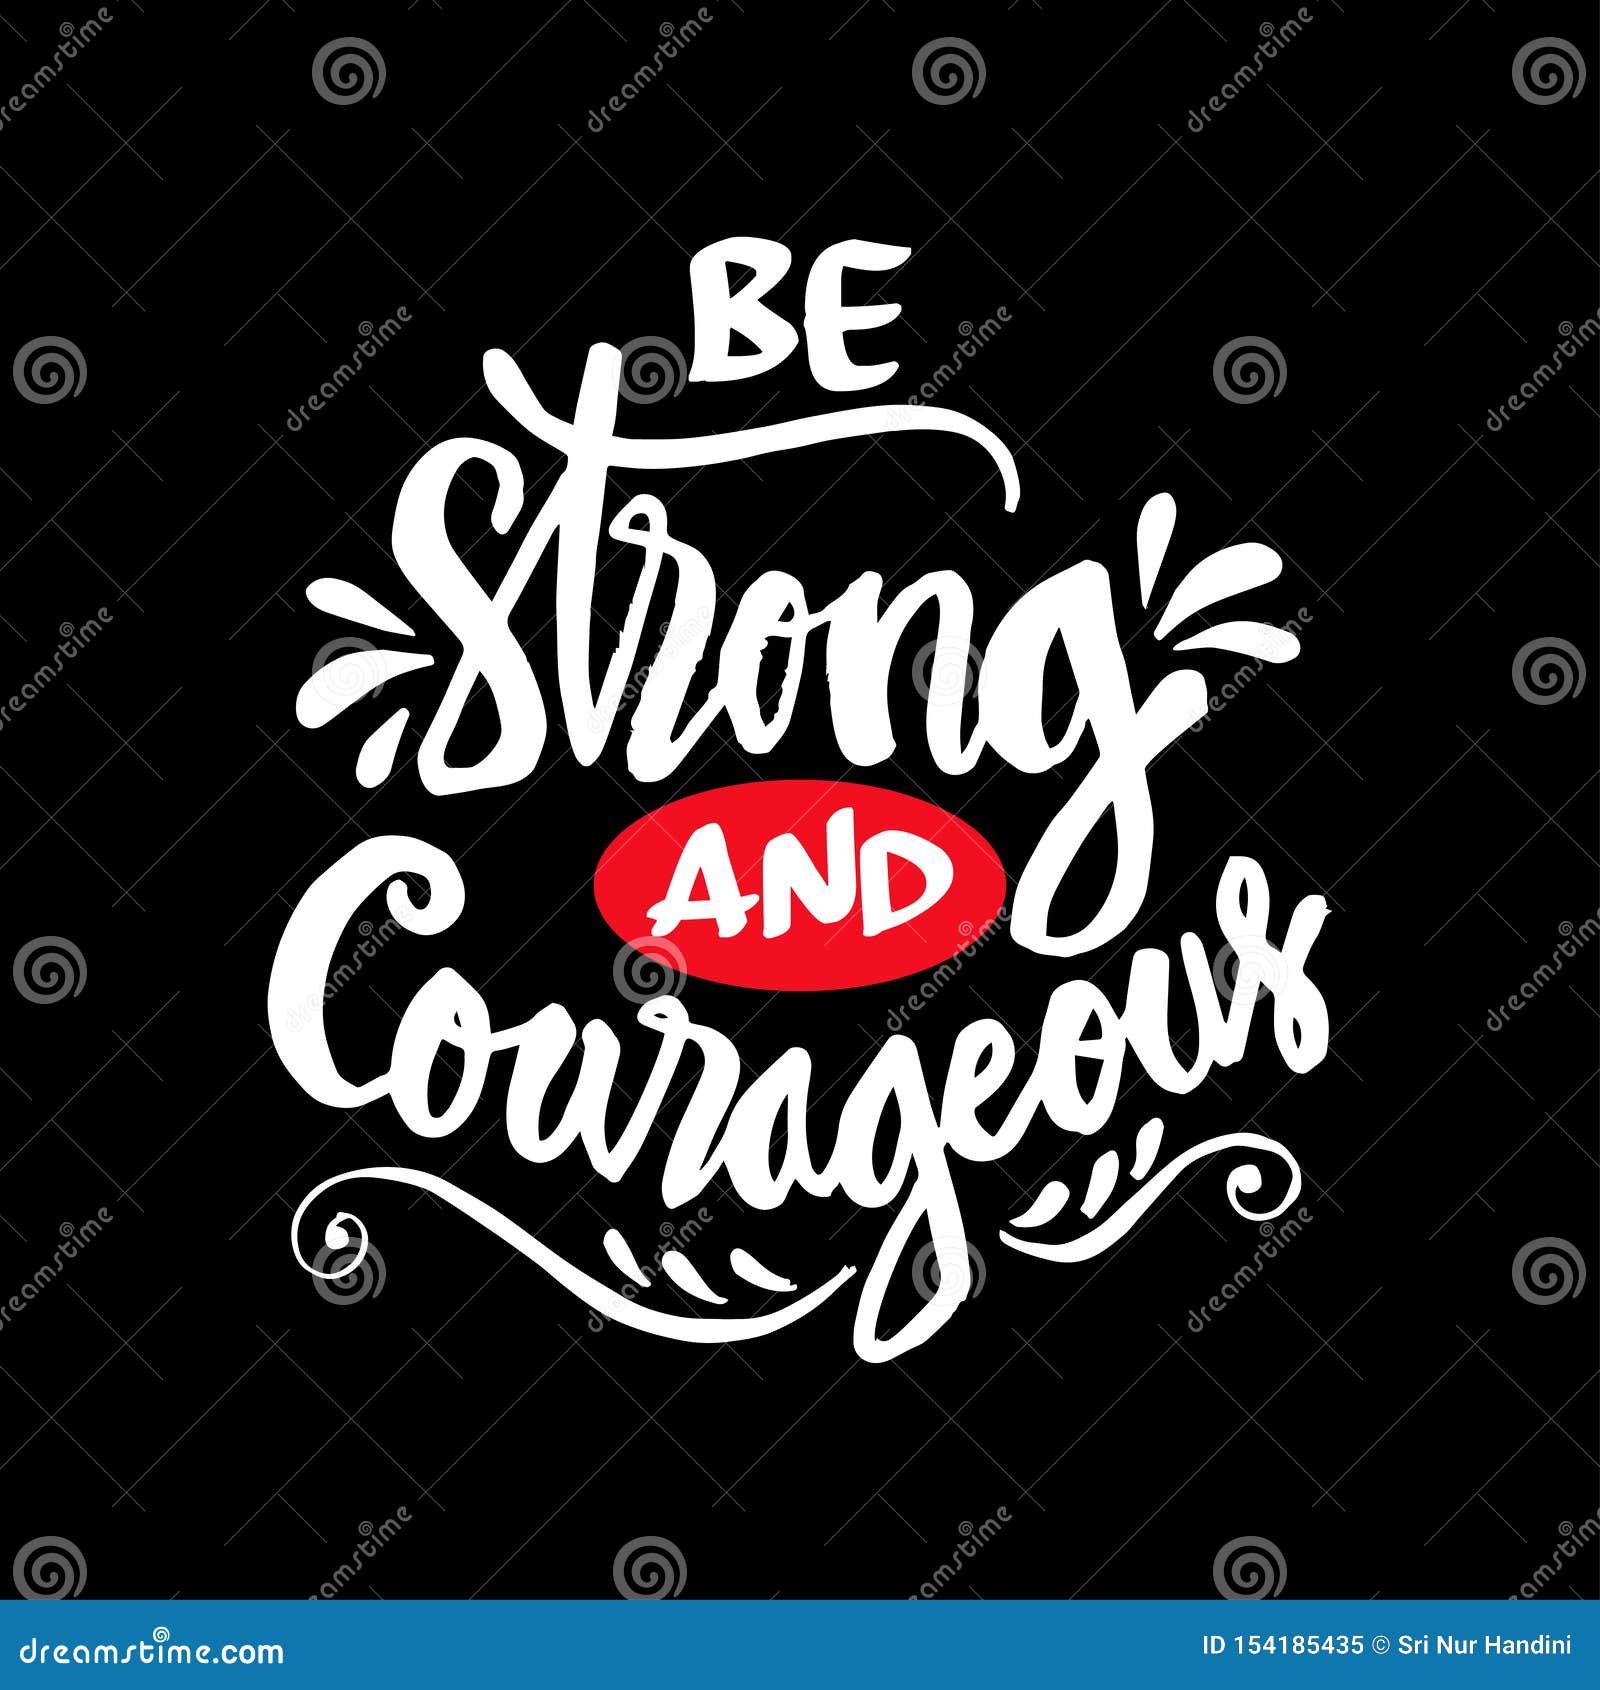 be strong and courageous.